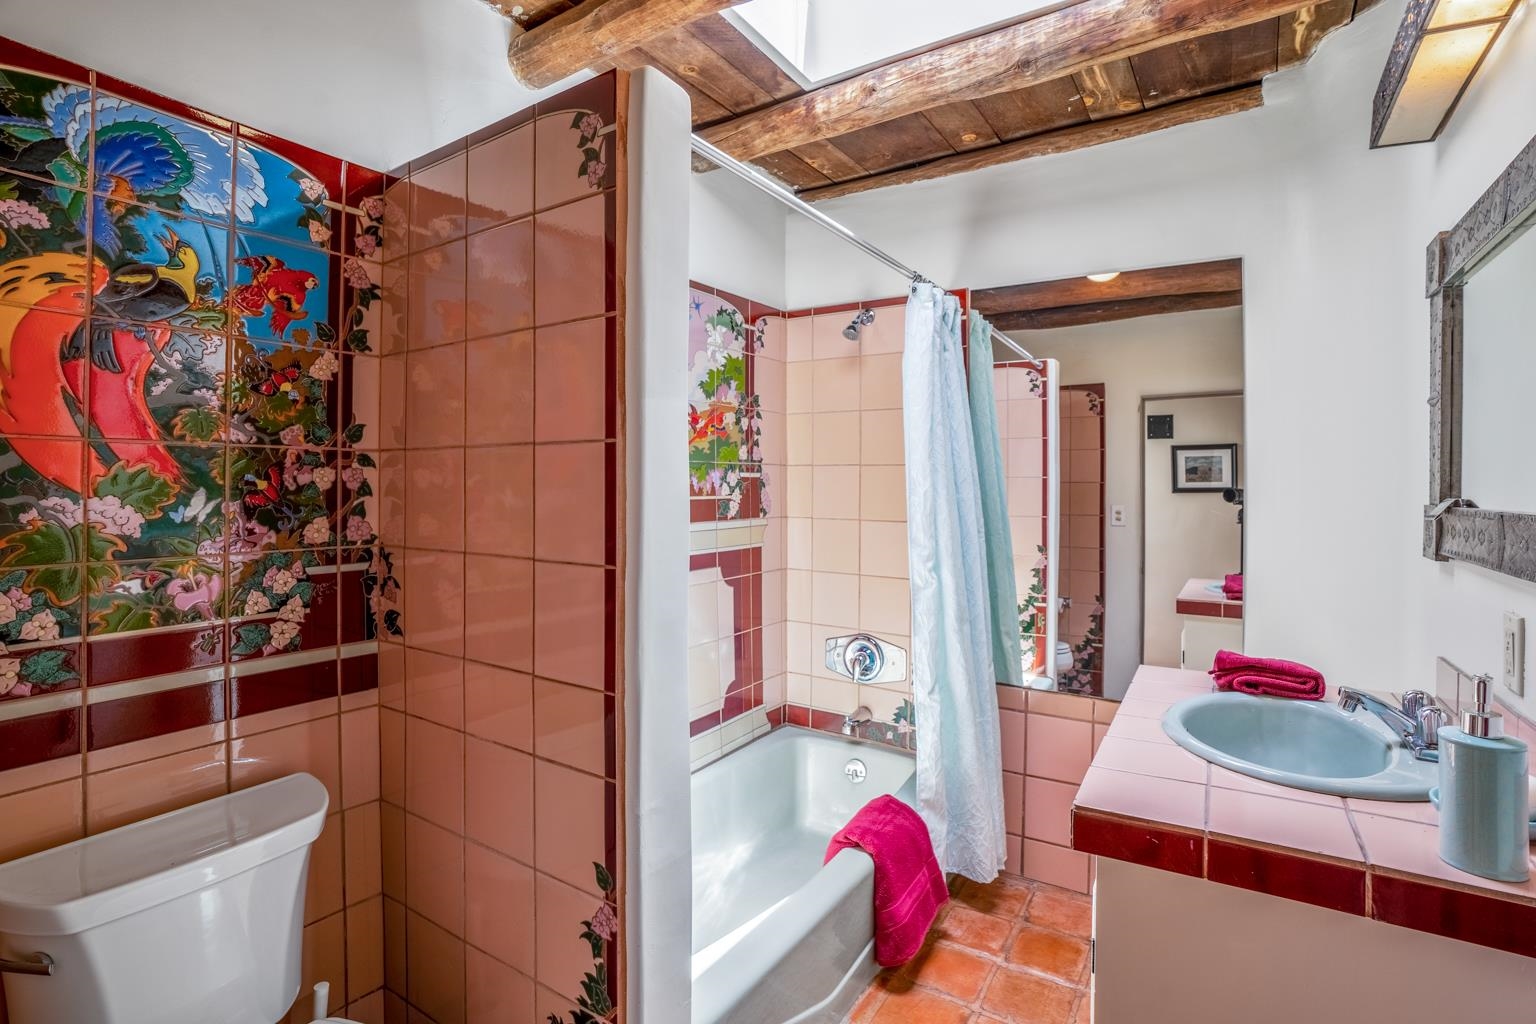 1018 1/2 Canyon Road, Santa Fe, New Mexico 87501, 7 Bedrooms Bedrooms, ,5 BathroomsBathrooms,Residential,For Sale,1018 1/2 Canyon Road,202202188